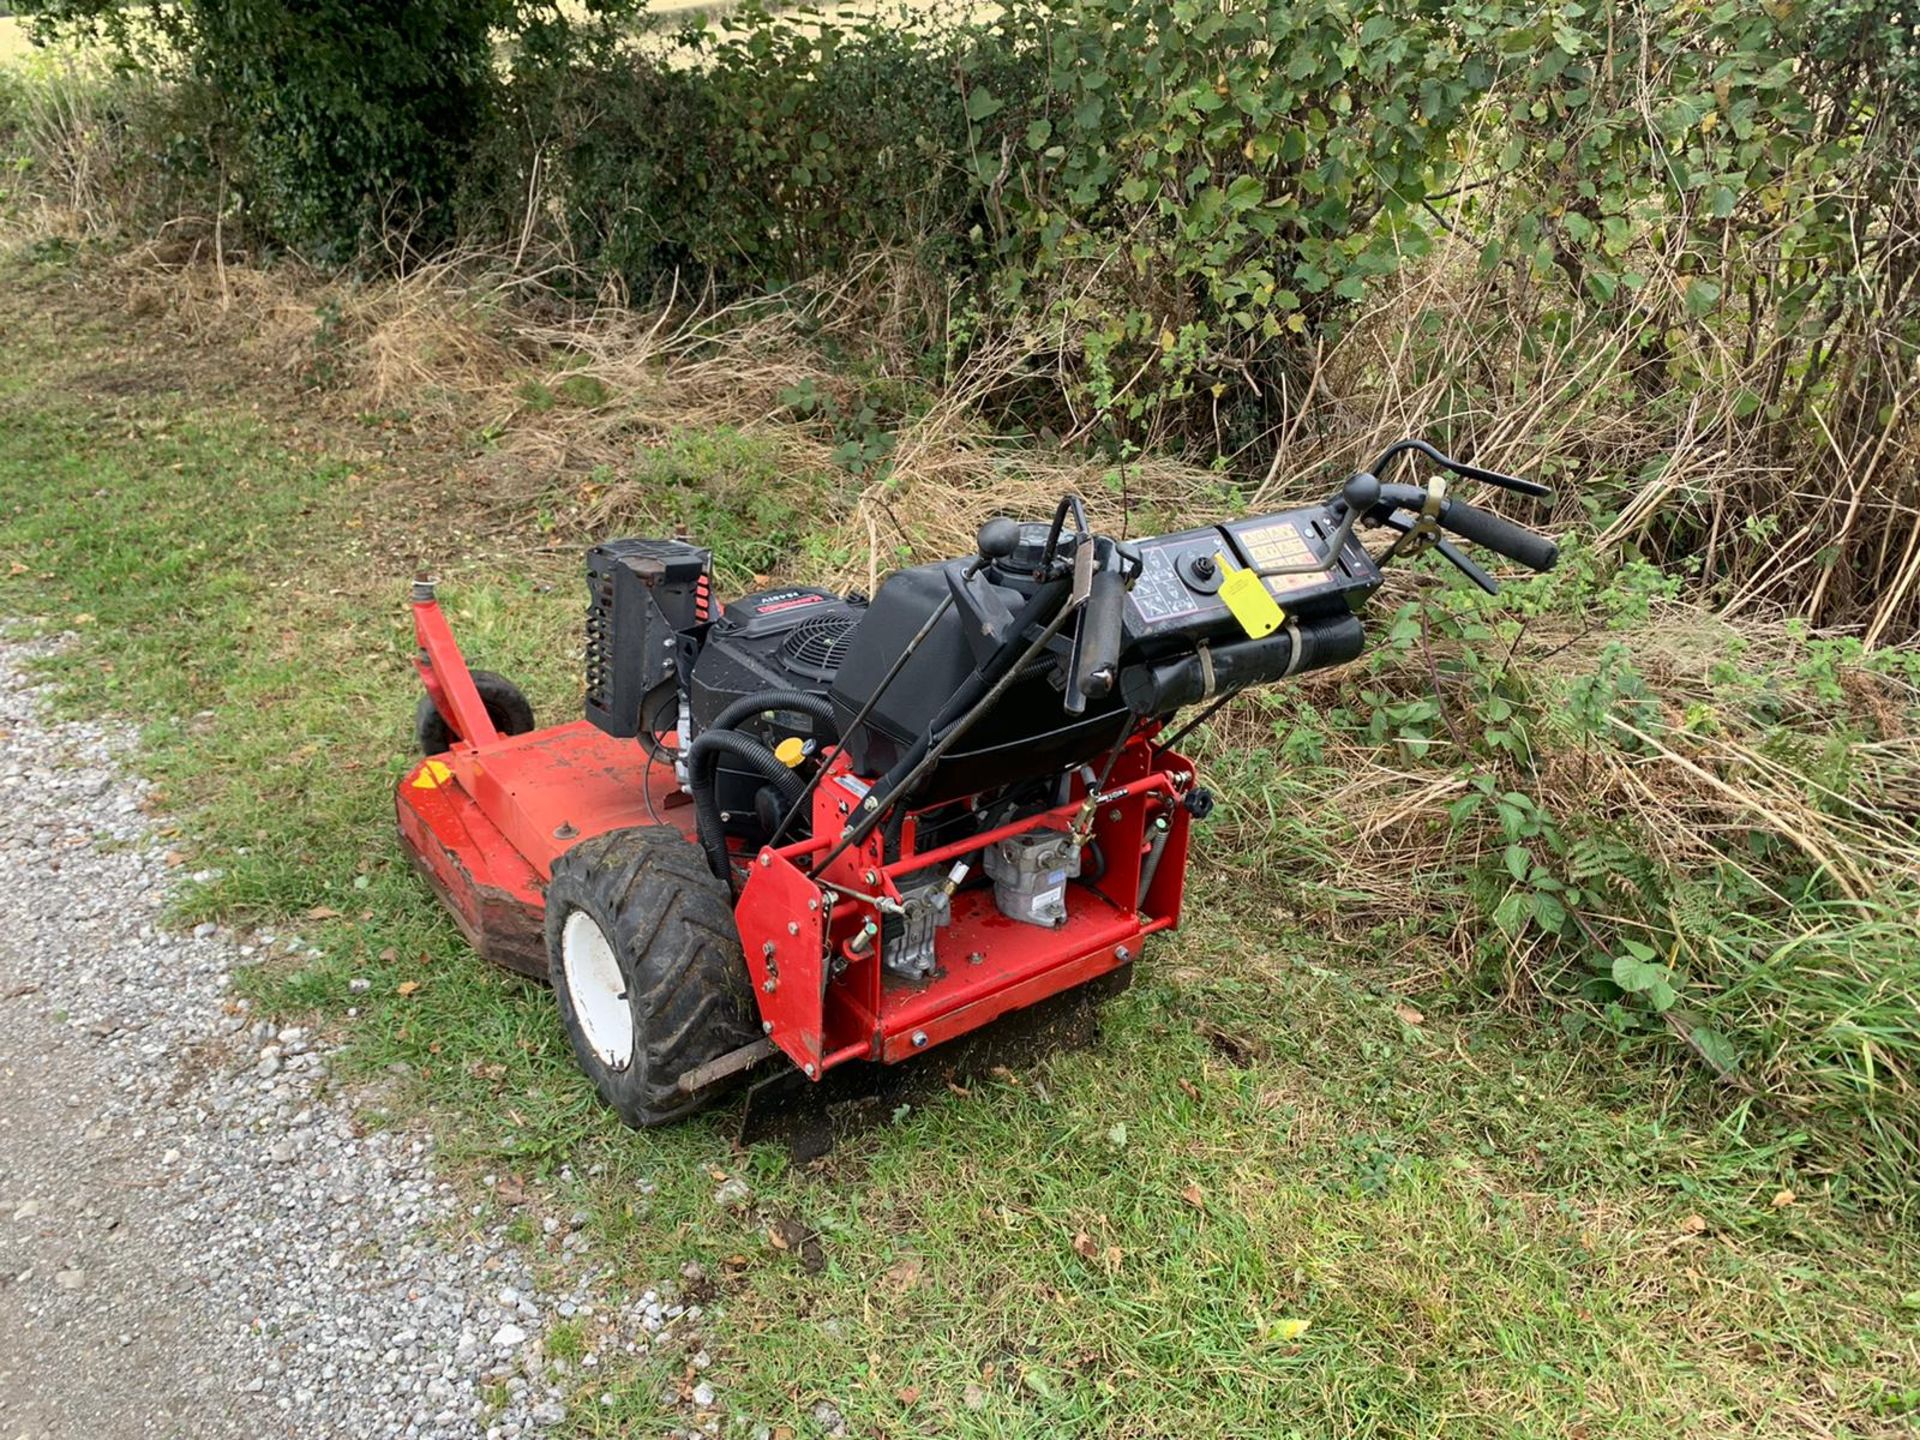 TORO 36" WALK BEHIND PEDESTRIAN MOWER, RUNS DRIVES AND CUTS WELL, PULL OR ELECTRIC START - Image 4 of 10